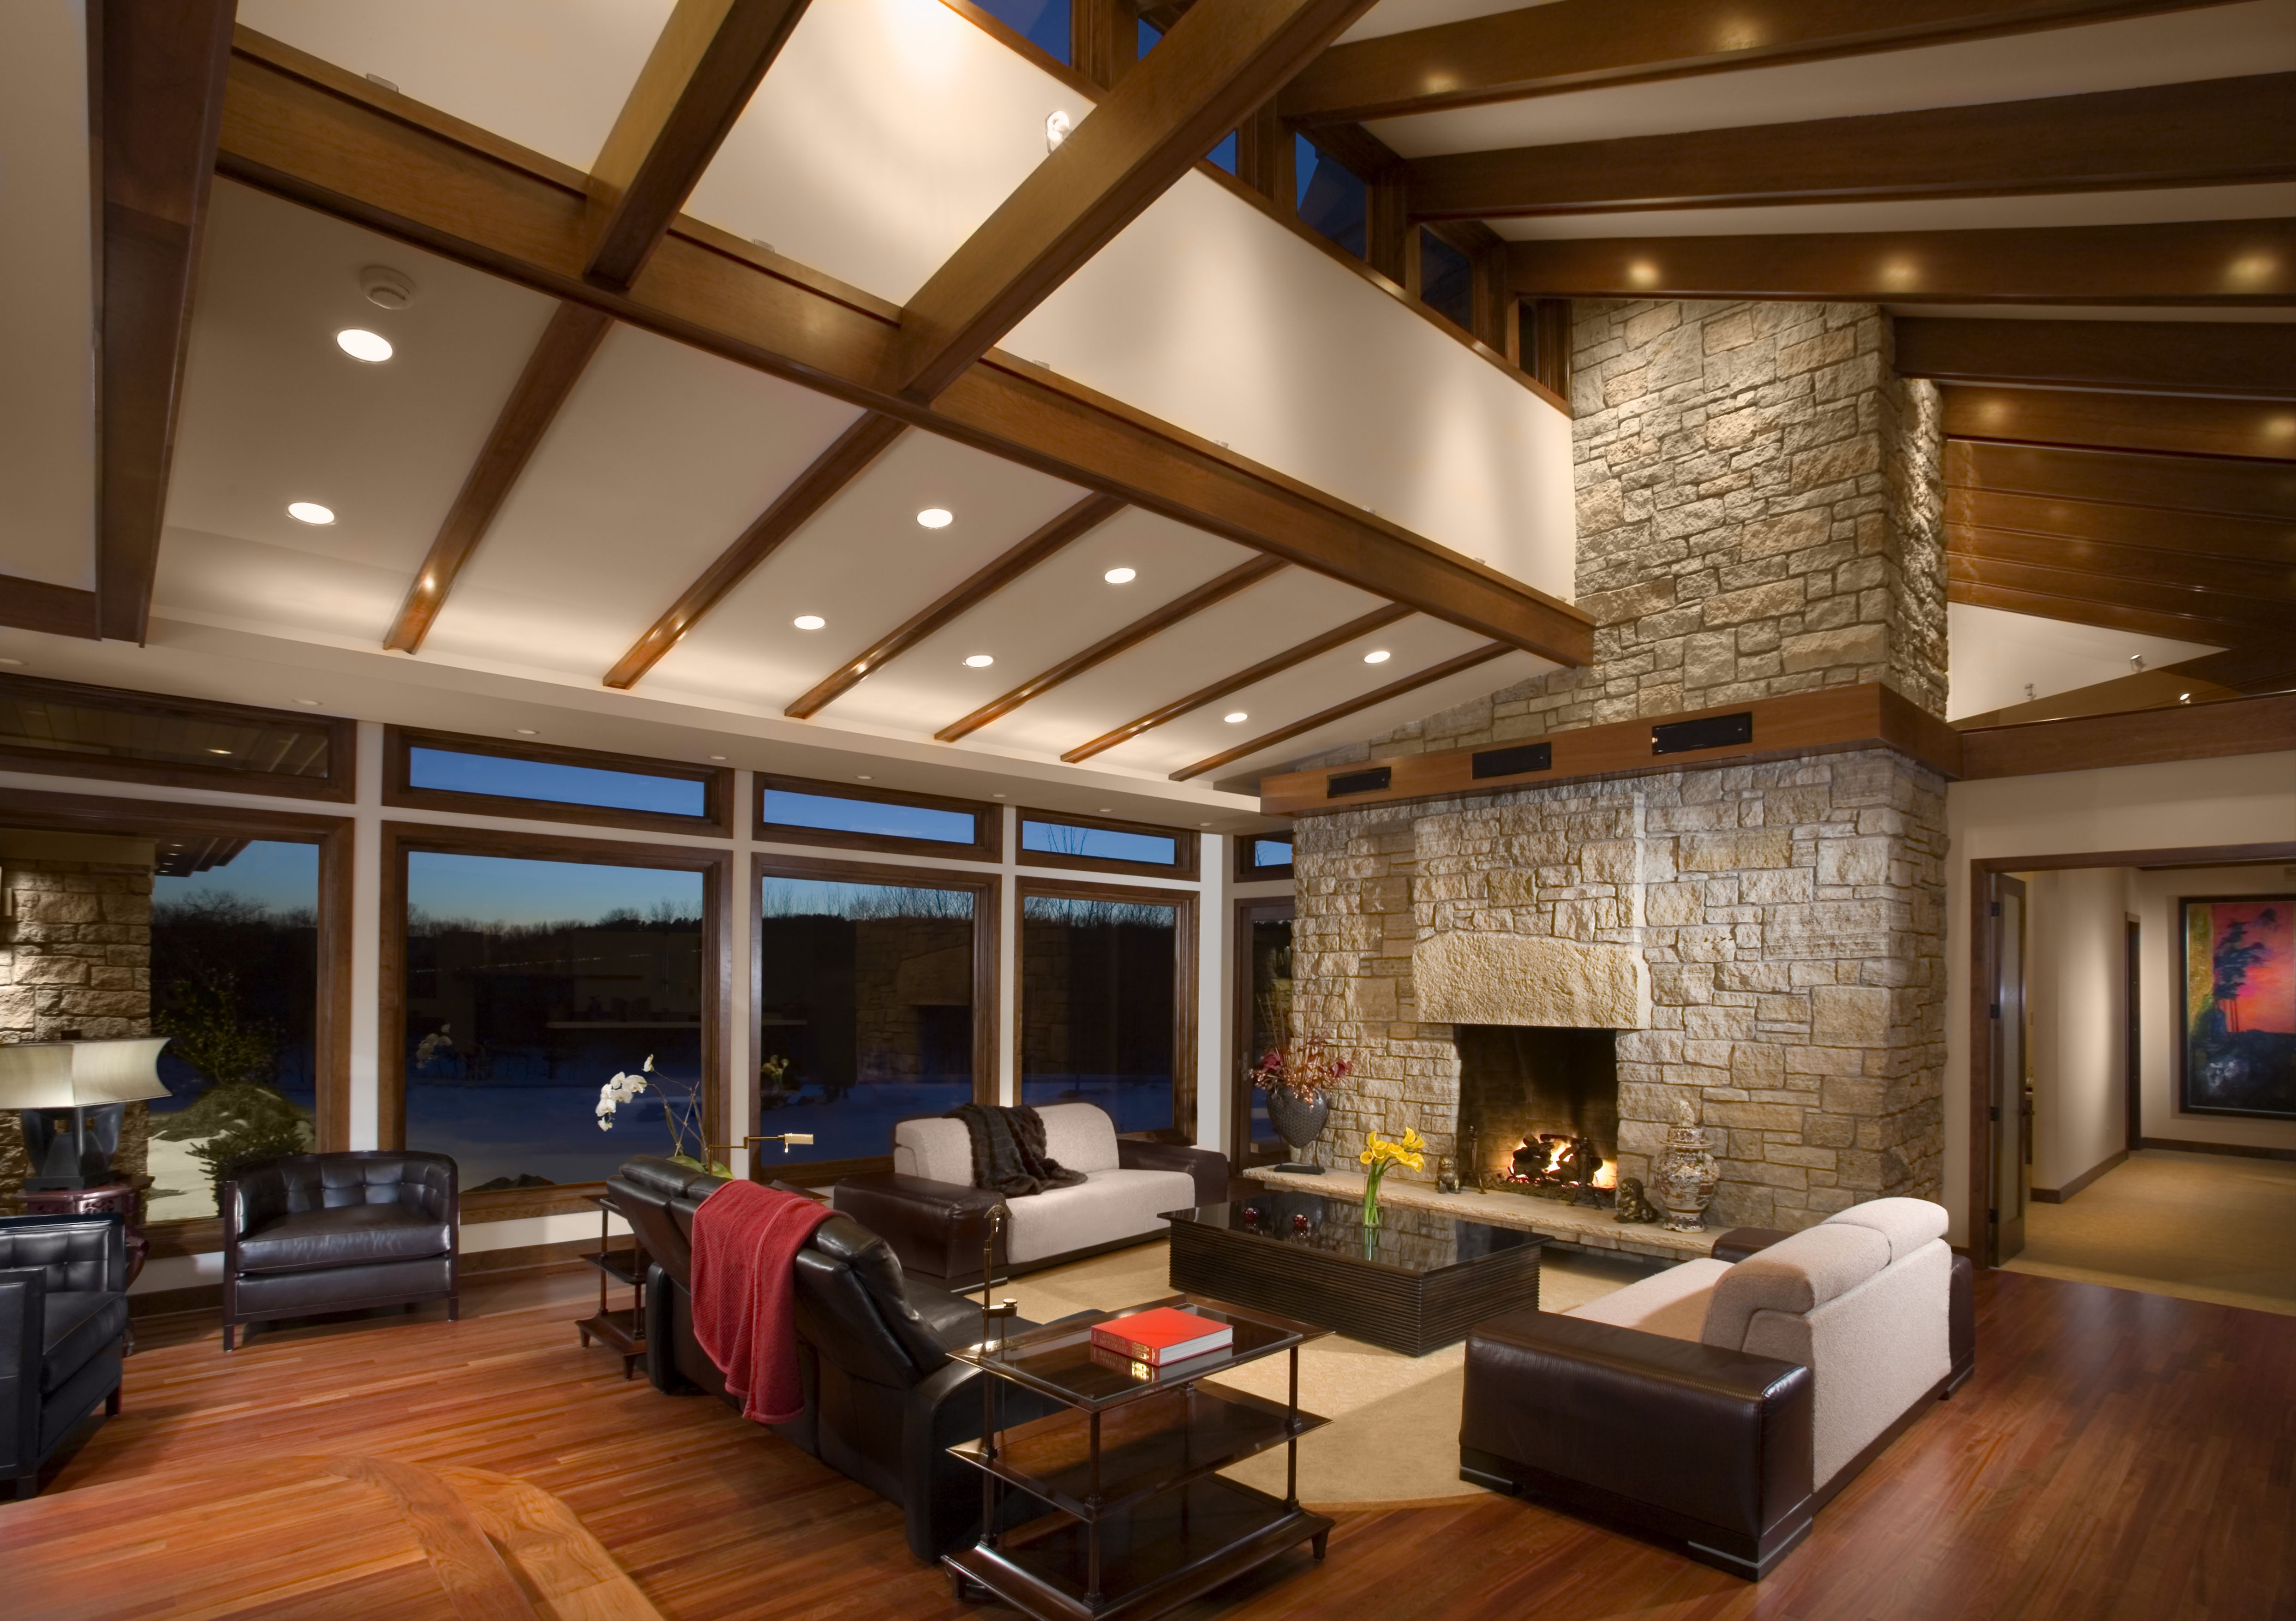 Lighting Ideas For Living Room Vaulted Ceilings